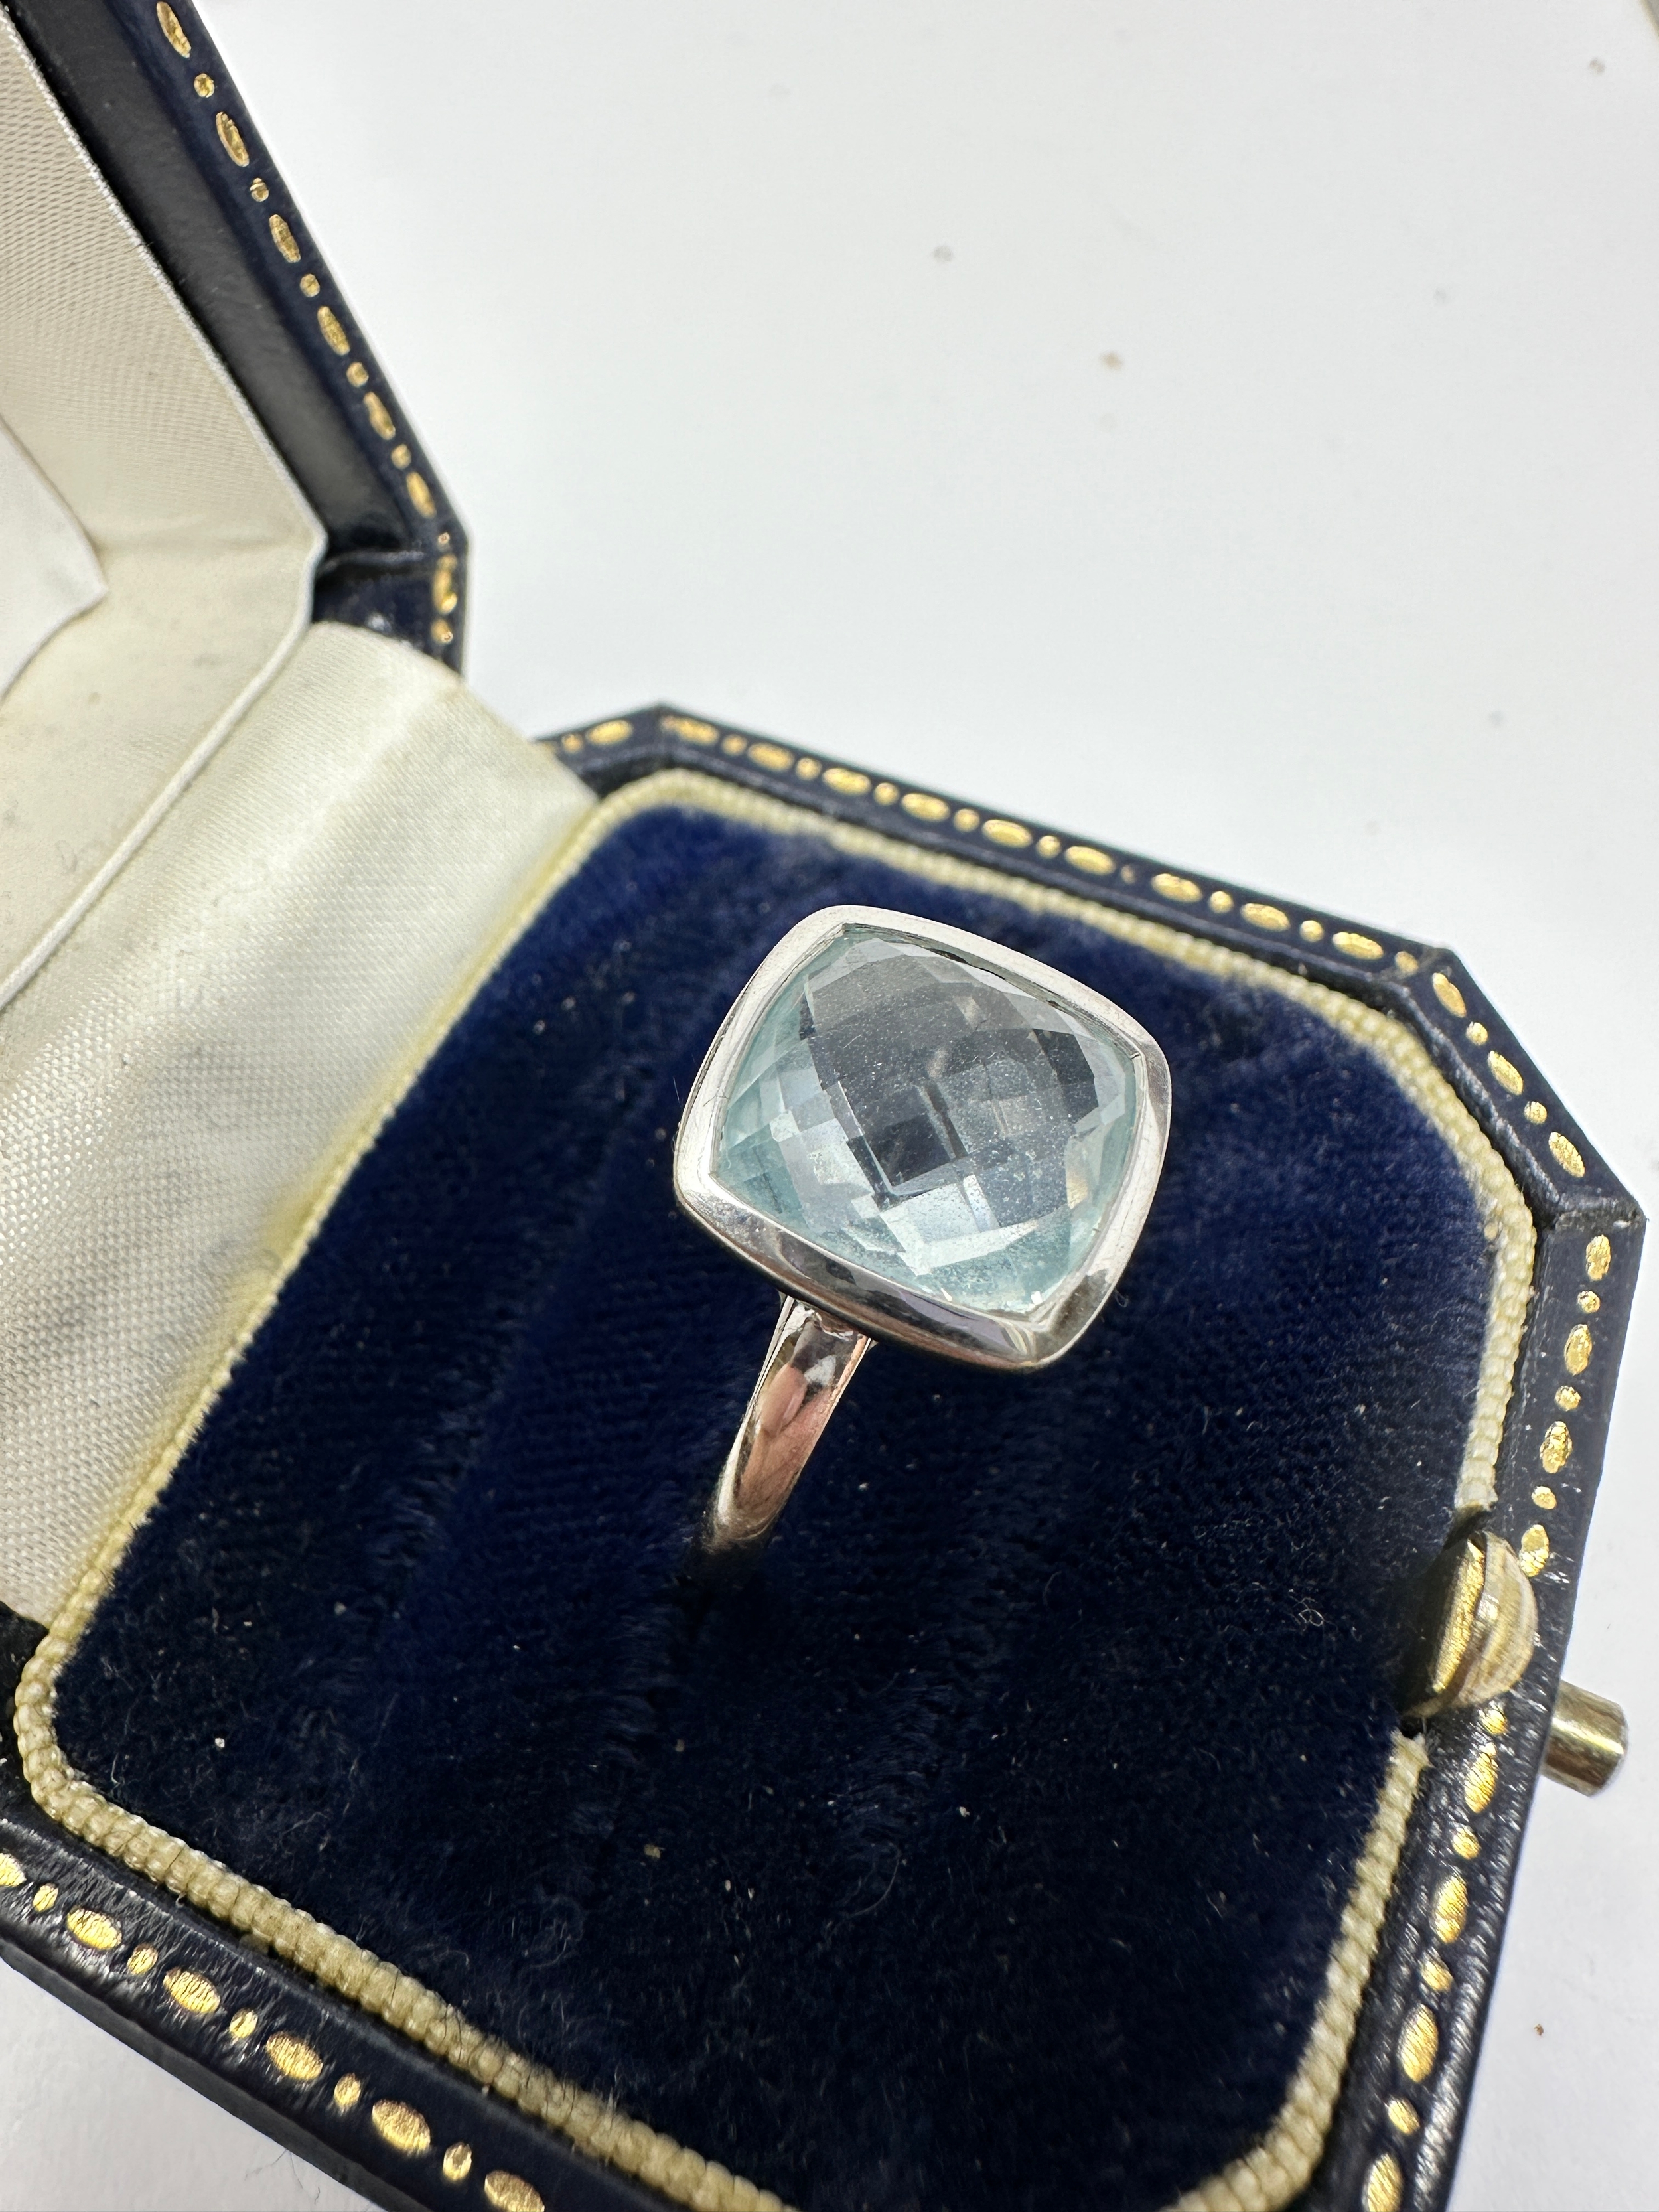 9ct white gold faceted blue gemstone ring weight 3.1g - Image 2 of 4